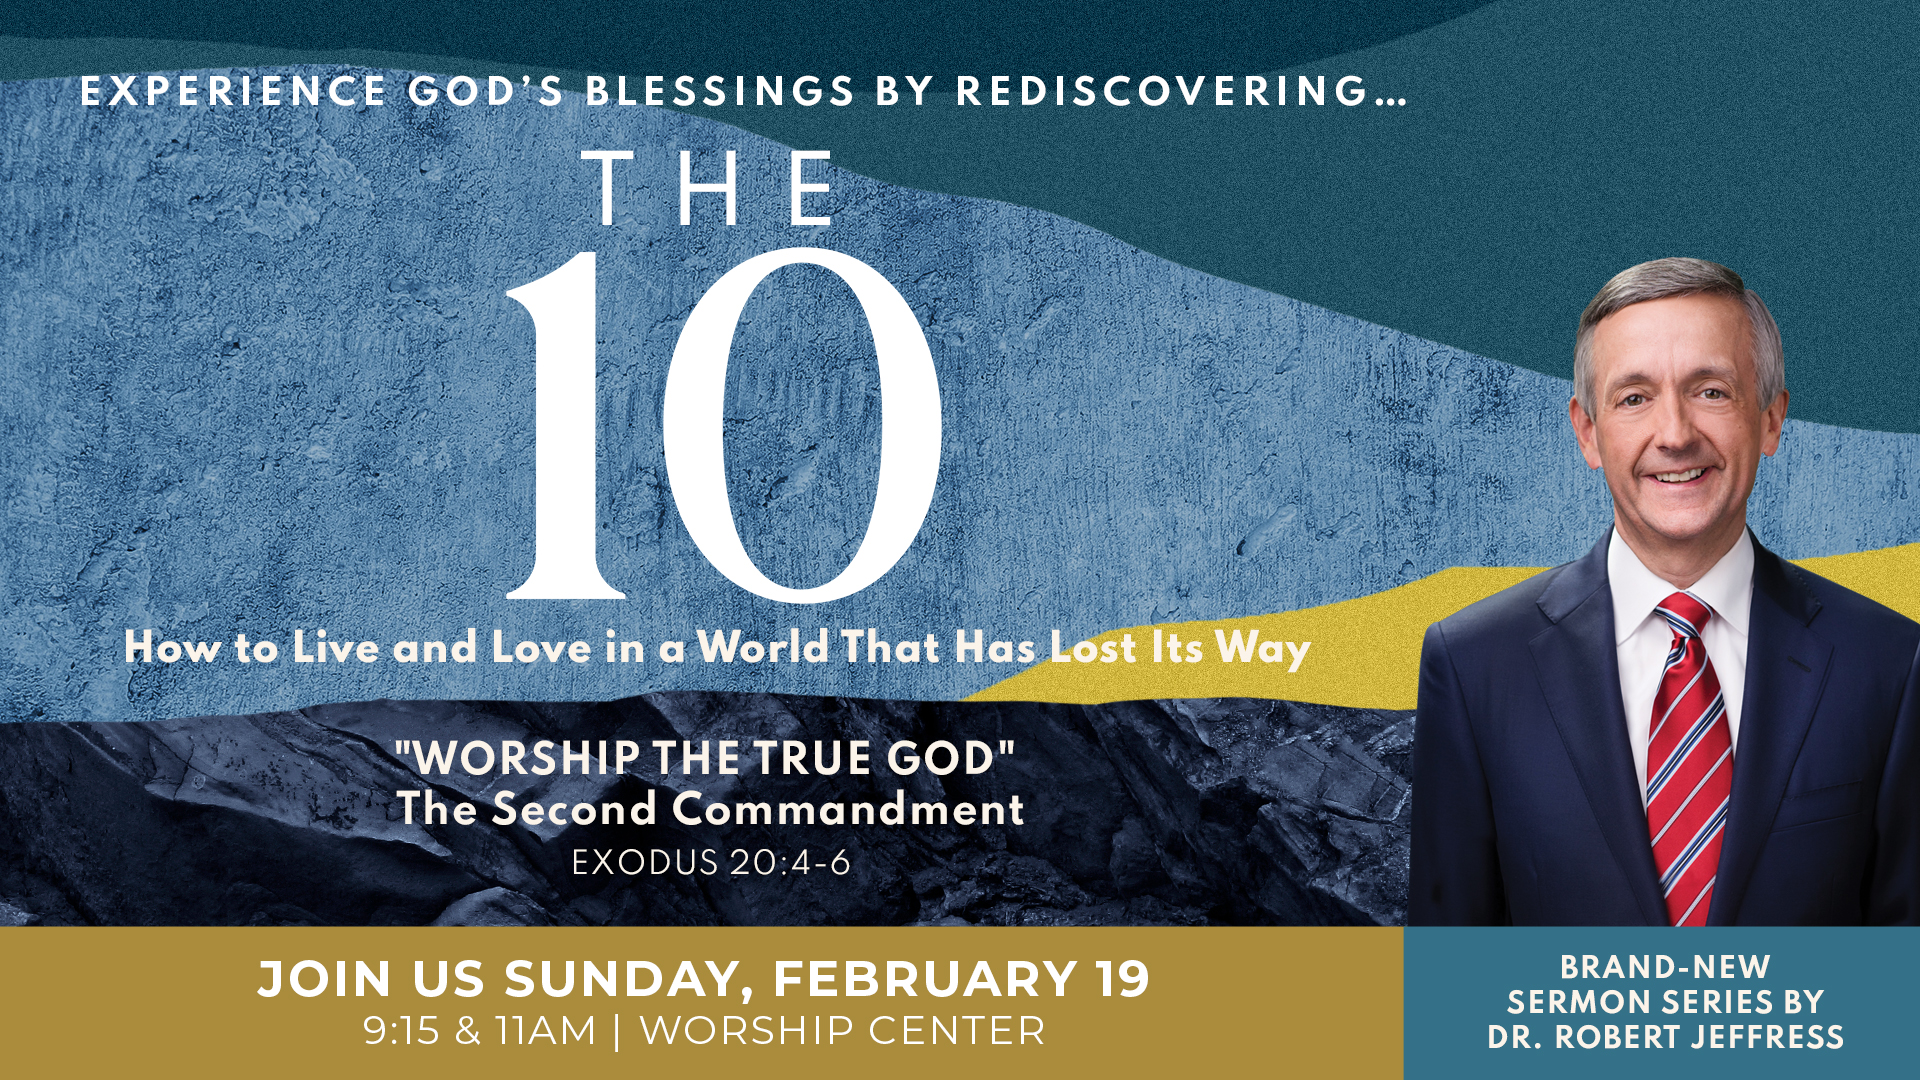 EXPERIENCE GOd'$ BLESSINGS BY REDISCOVERING THE 10 How to Live and Love in & World That Has Lost Its "WORSHip THE TRUE GOD" The Second Commandment EXODUS 20.4-6 JOIN US SUNDAY, FEBRUARY 19 BRAND-NEW SERMON SERIES BY 9.15 & IIAM WopshIP CENTER Robert JEFFRESS Way